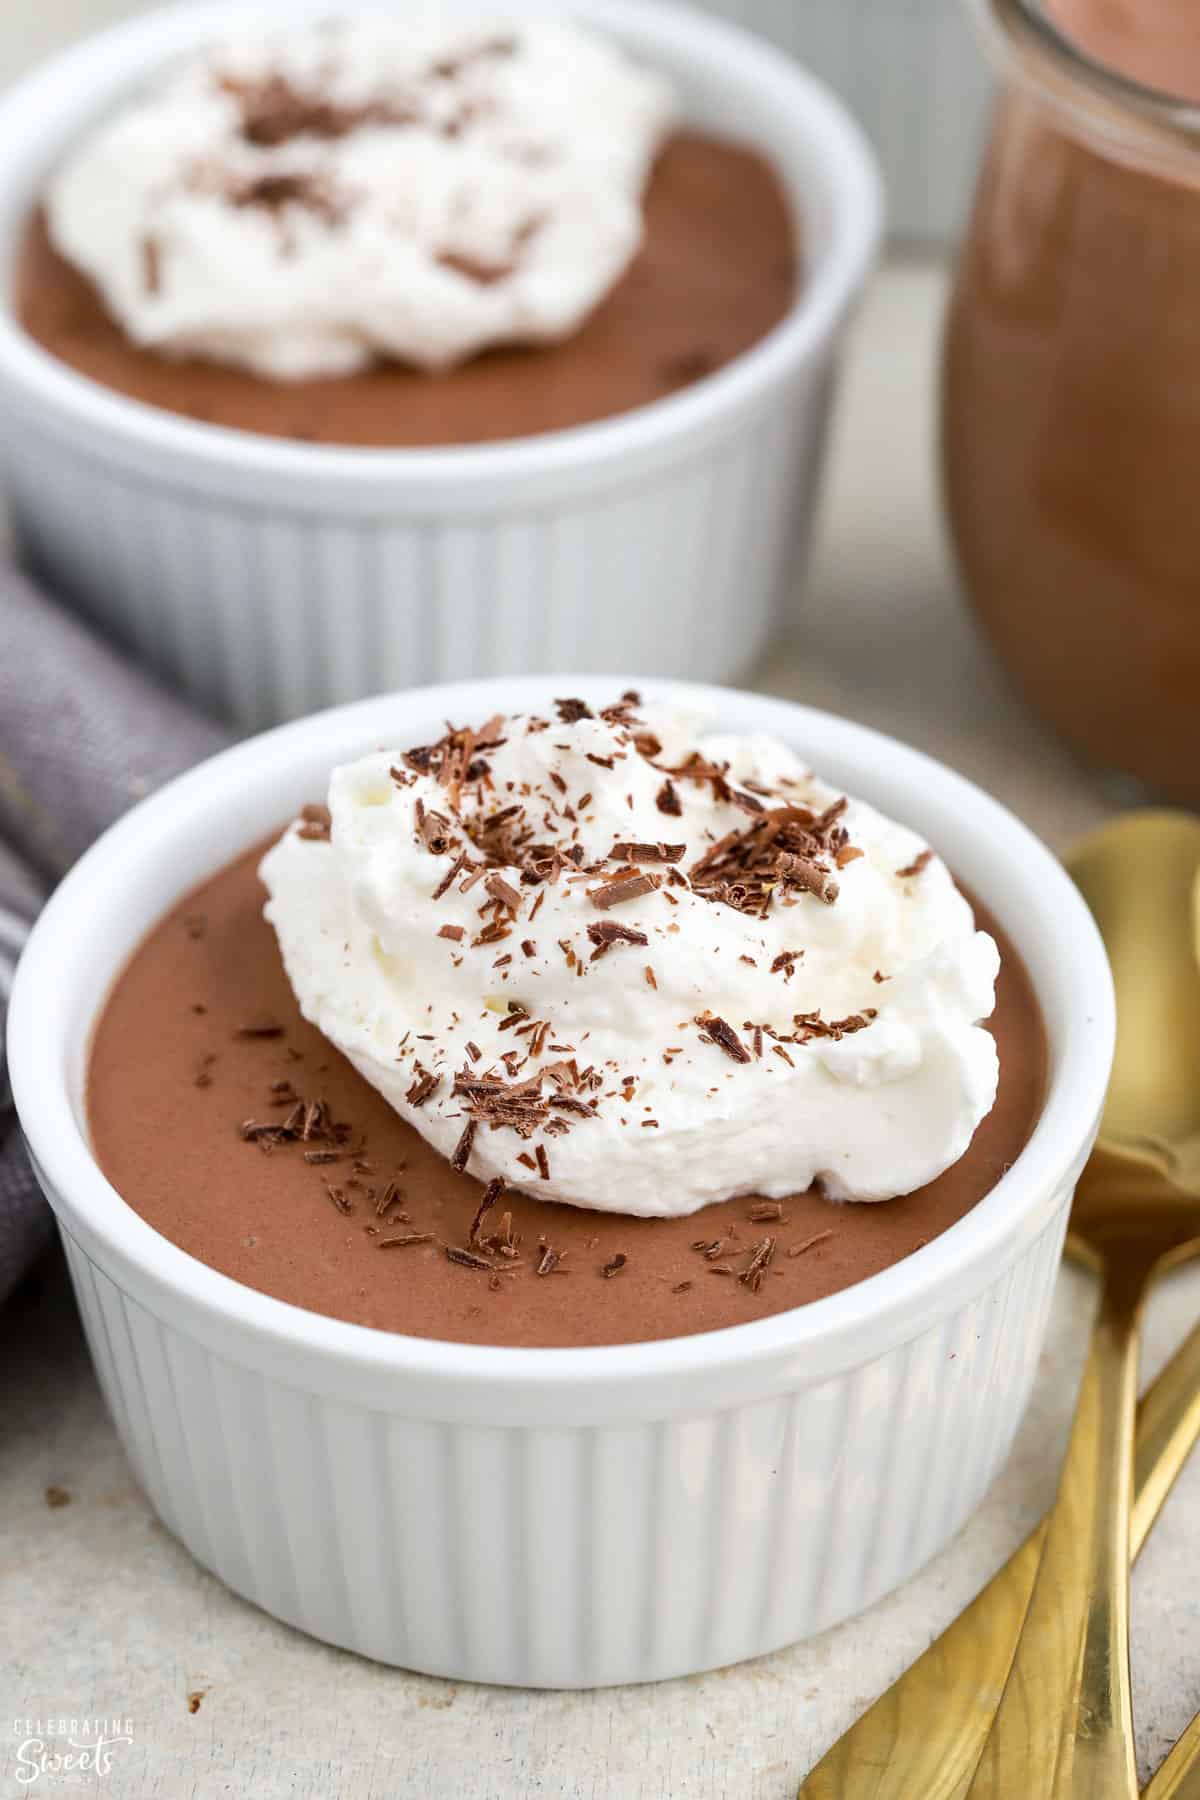 Chocolate mousse topped with whipped cream in a white ramekin